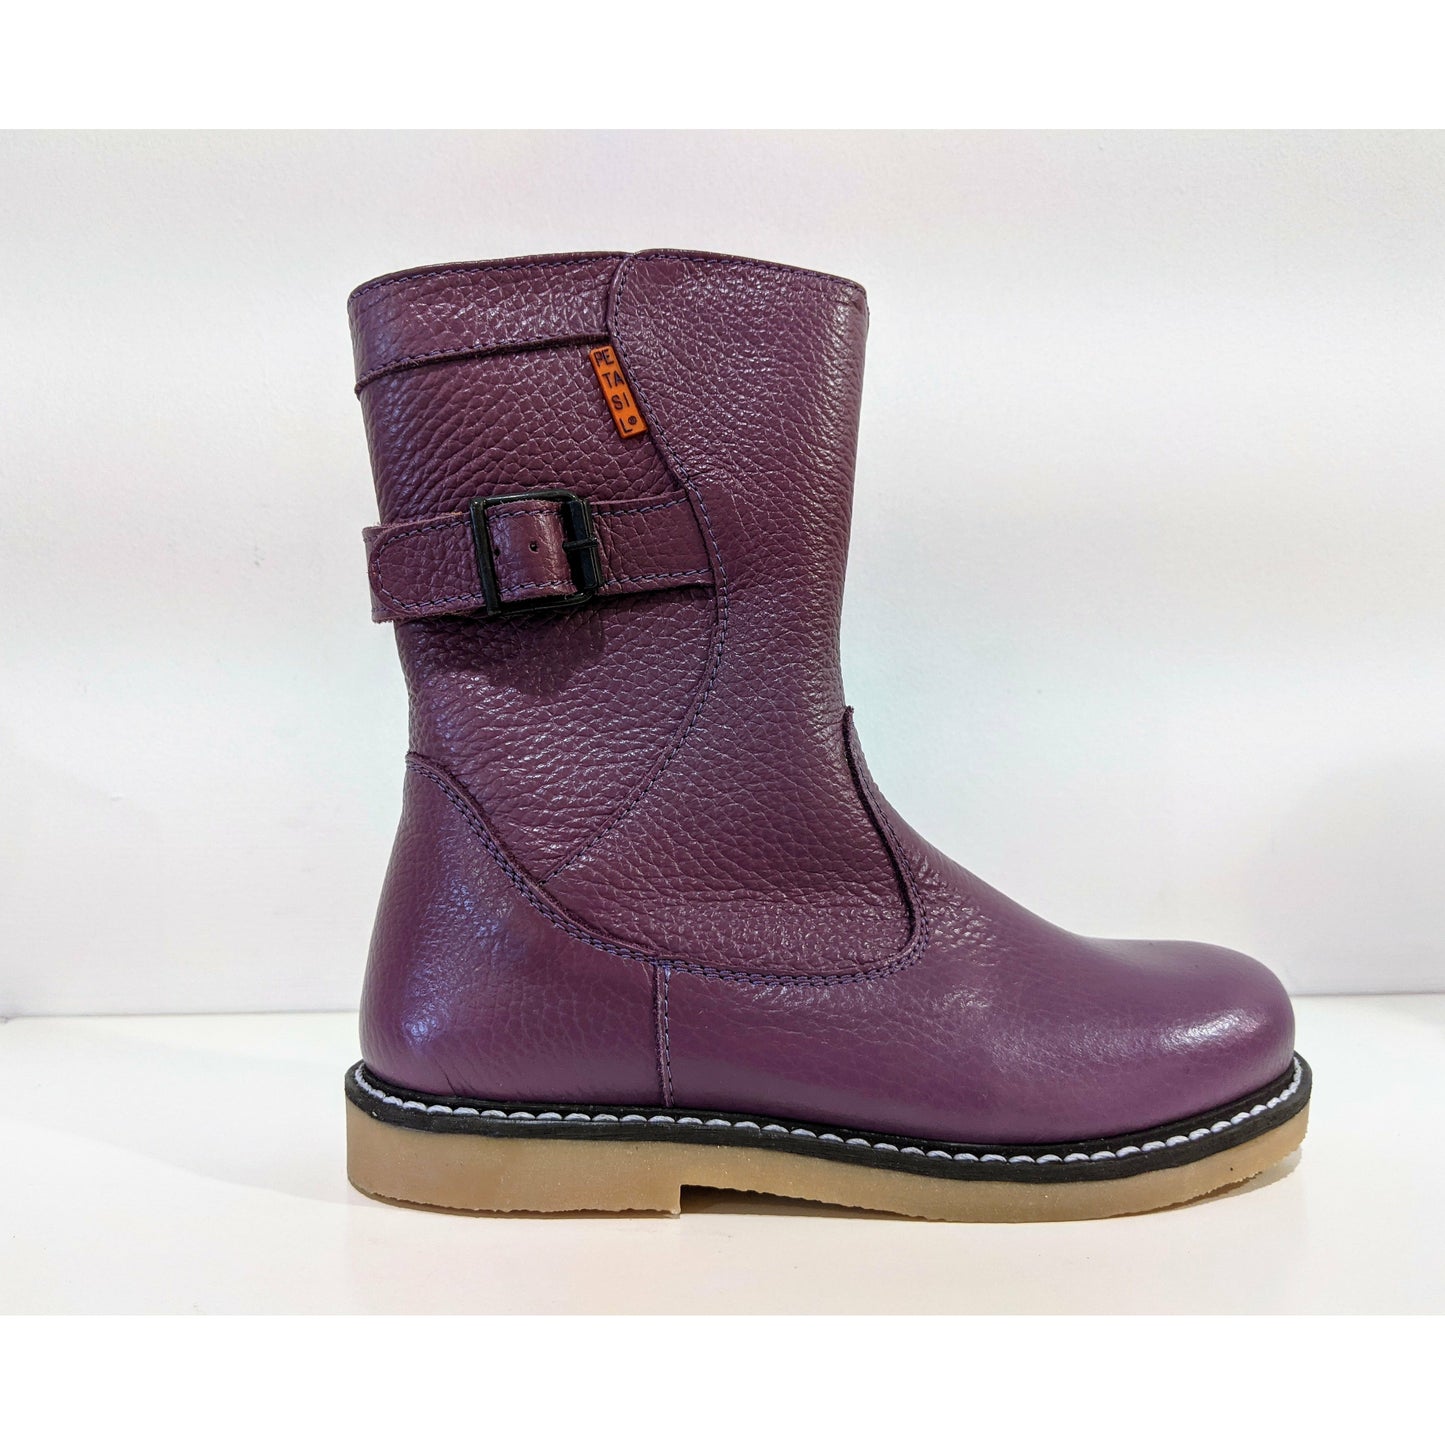 A girls calf boot by Petasil, style Brenda, in purple leather with zip fastening. Right side view.